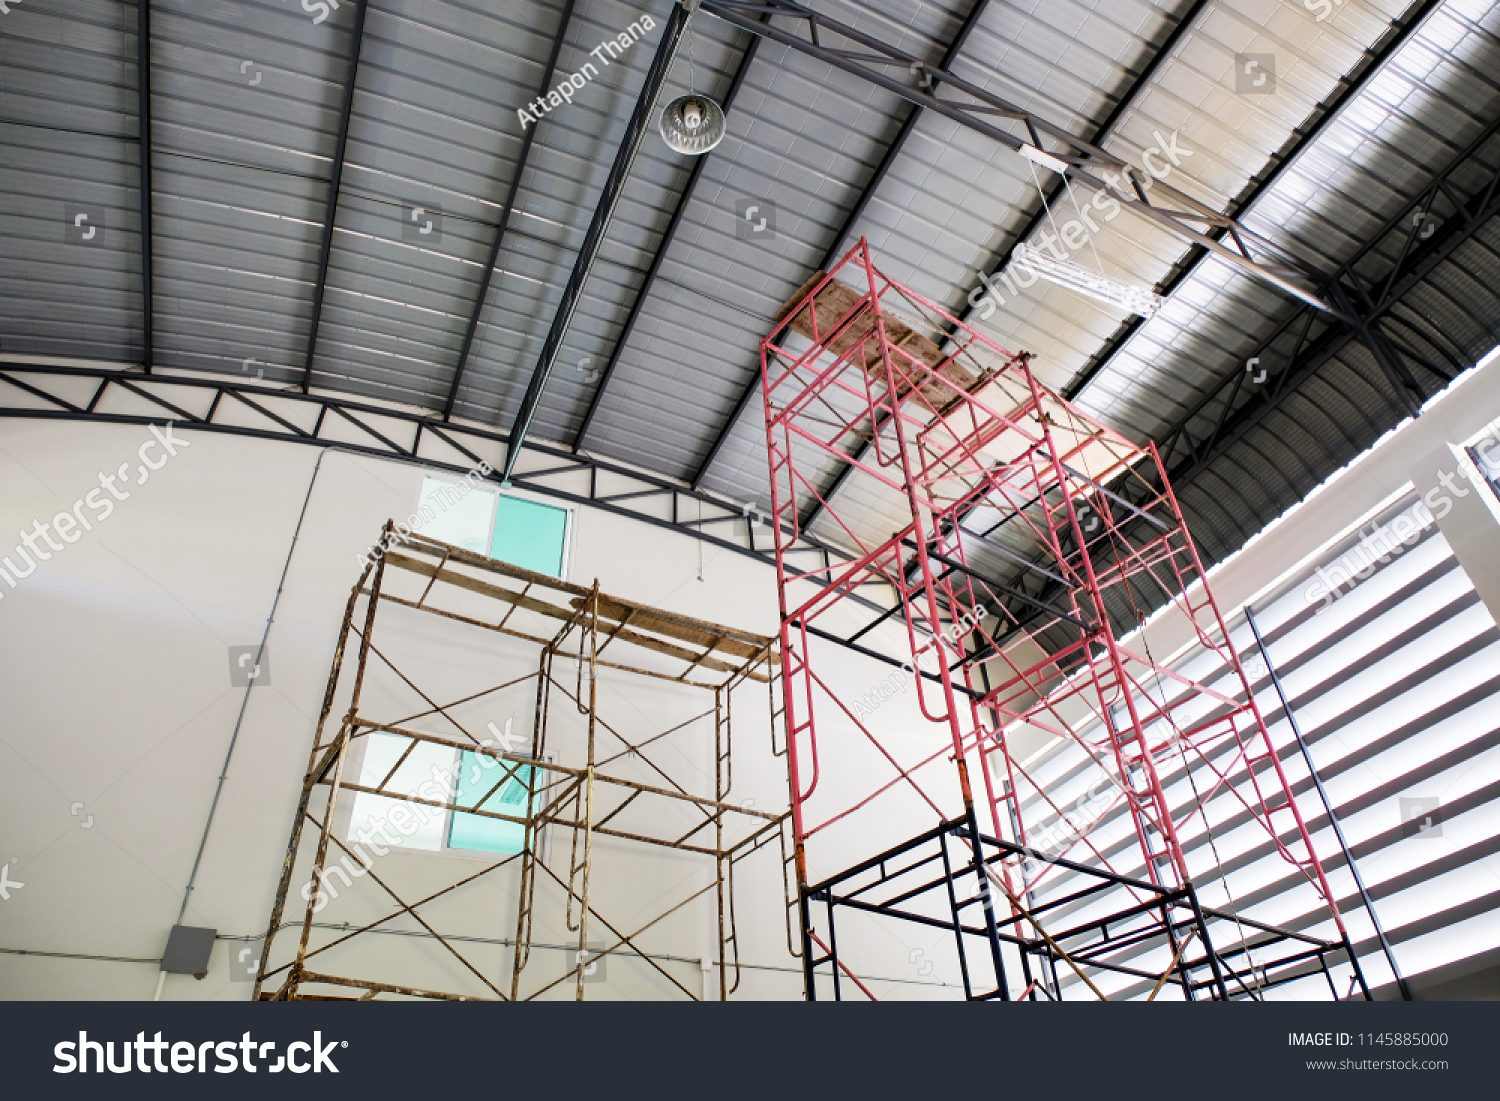 Scaffolding Replacing Light Bulbs High Roofing Stock Image